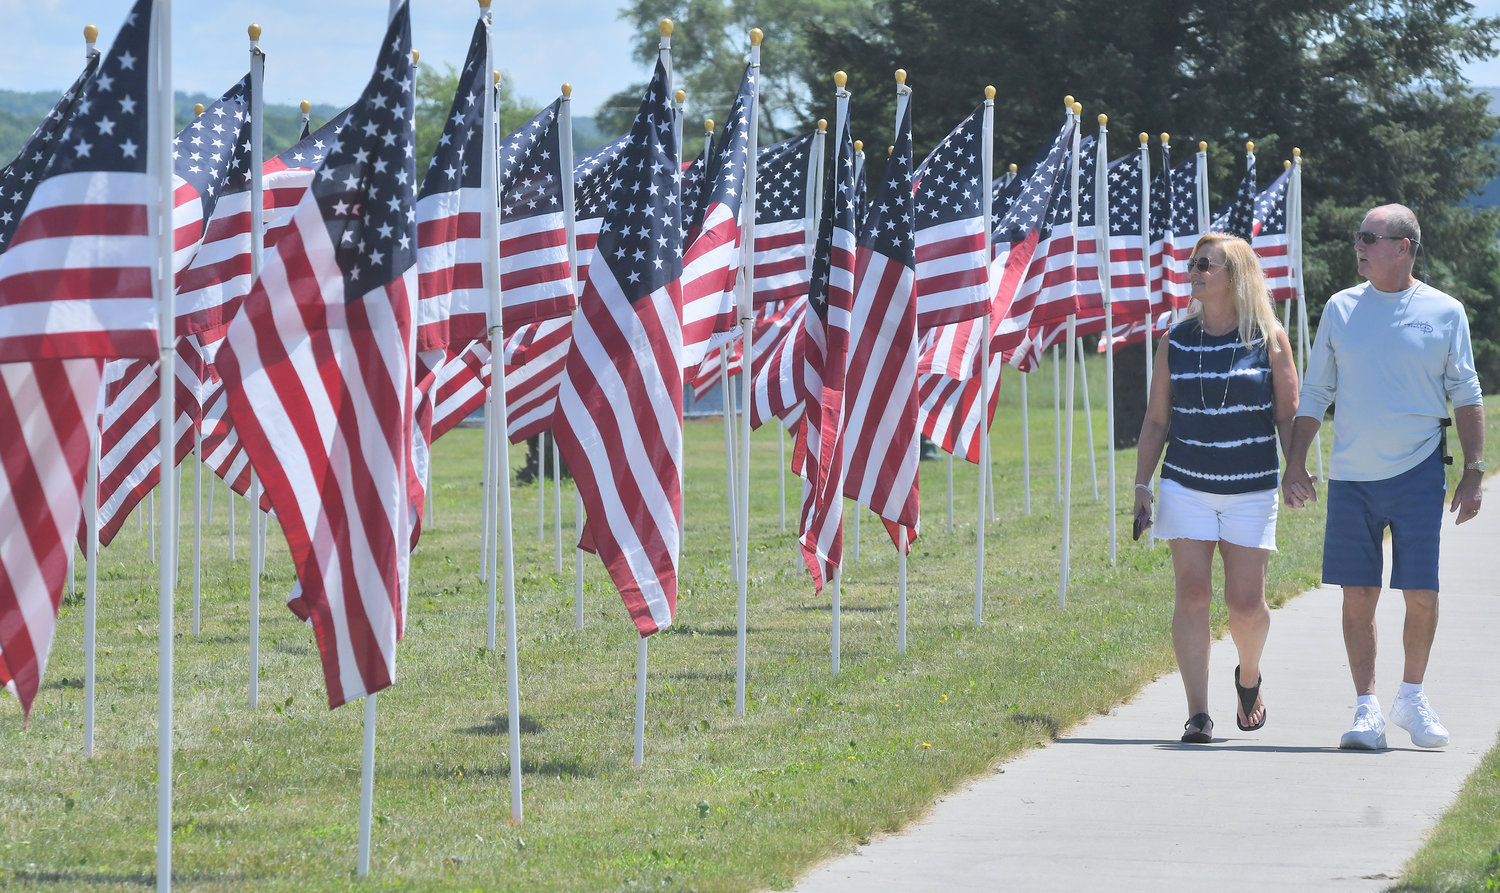 ENJOYING THE PATRIOTIC SIGHT — Joan O’Brien and her husband, Eddie, both of Florida, admire the flag display on Griffiss Park on Saturday.